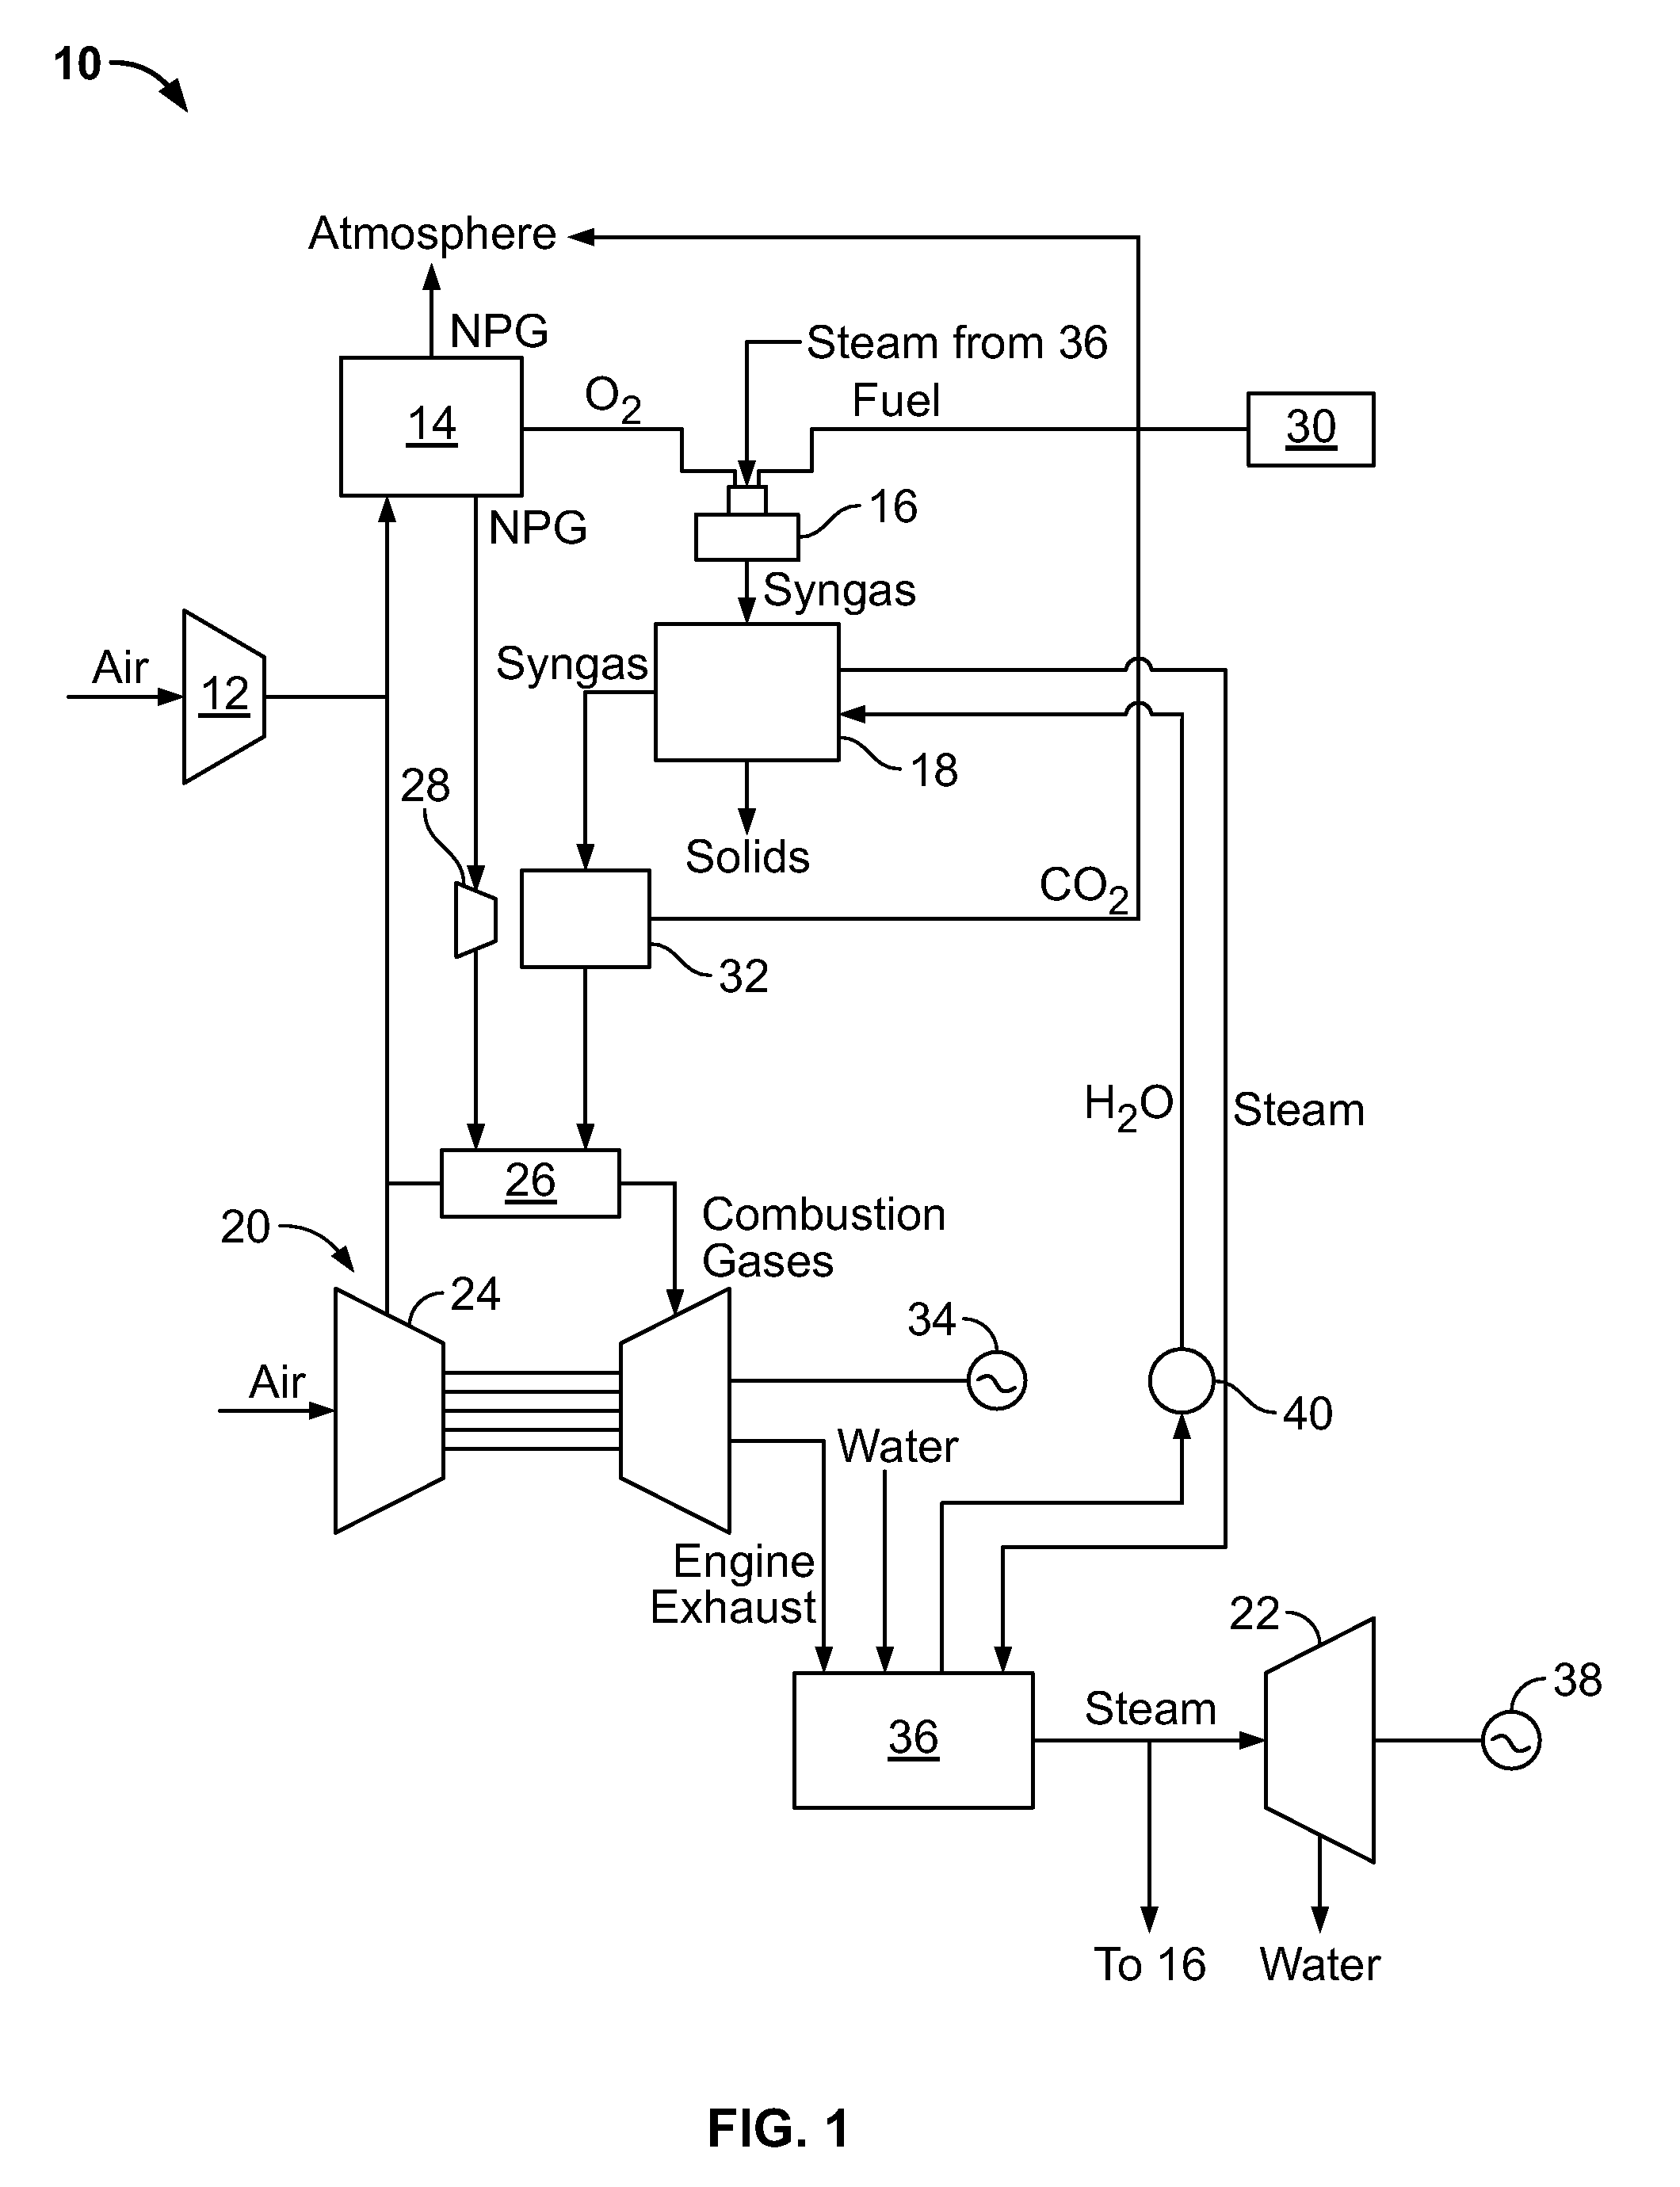 Method and apparatus for cooling syngas within a gasifier system